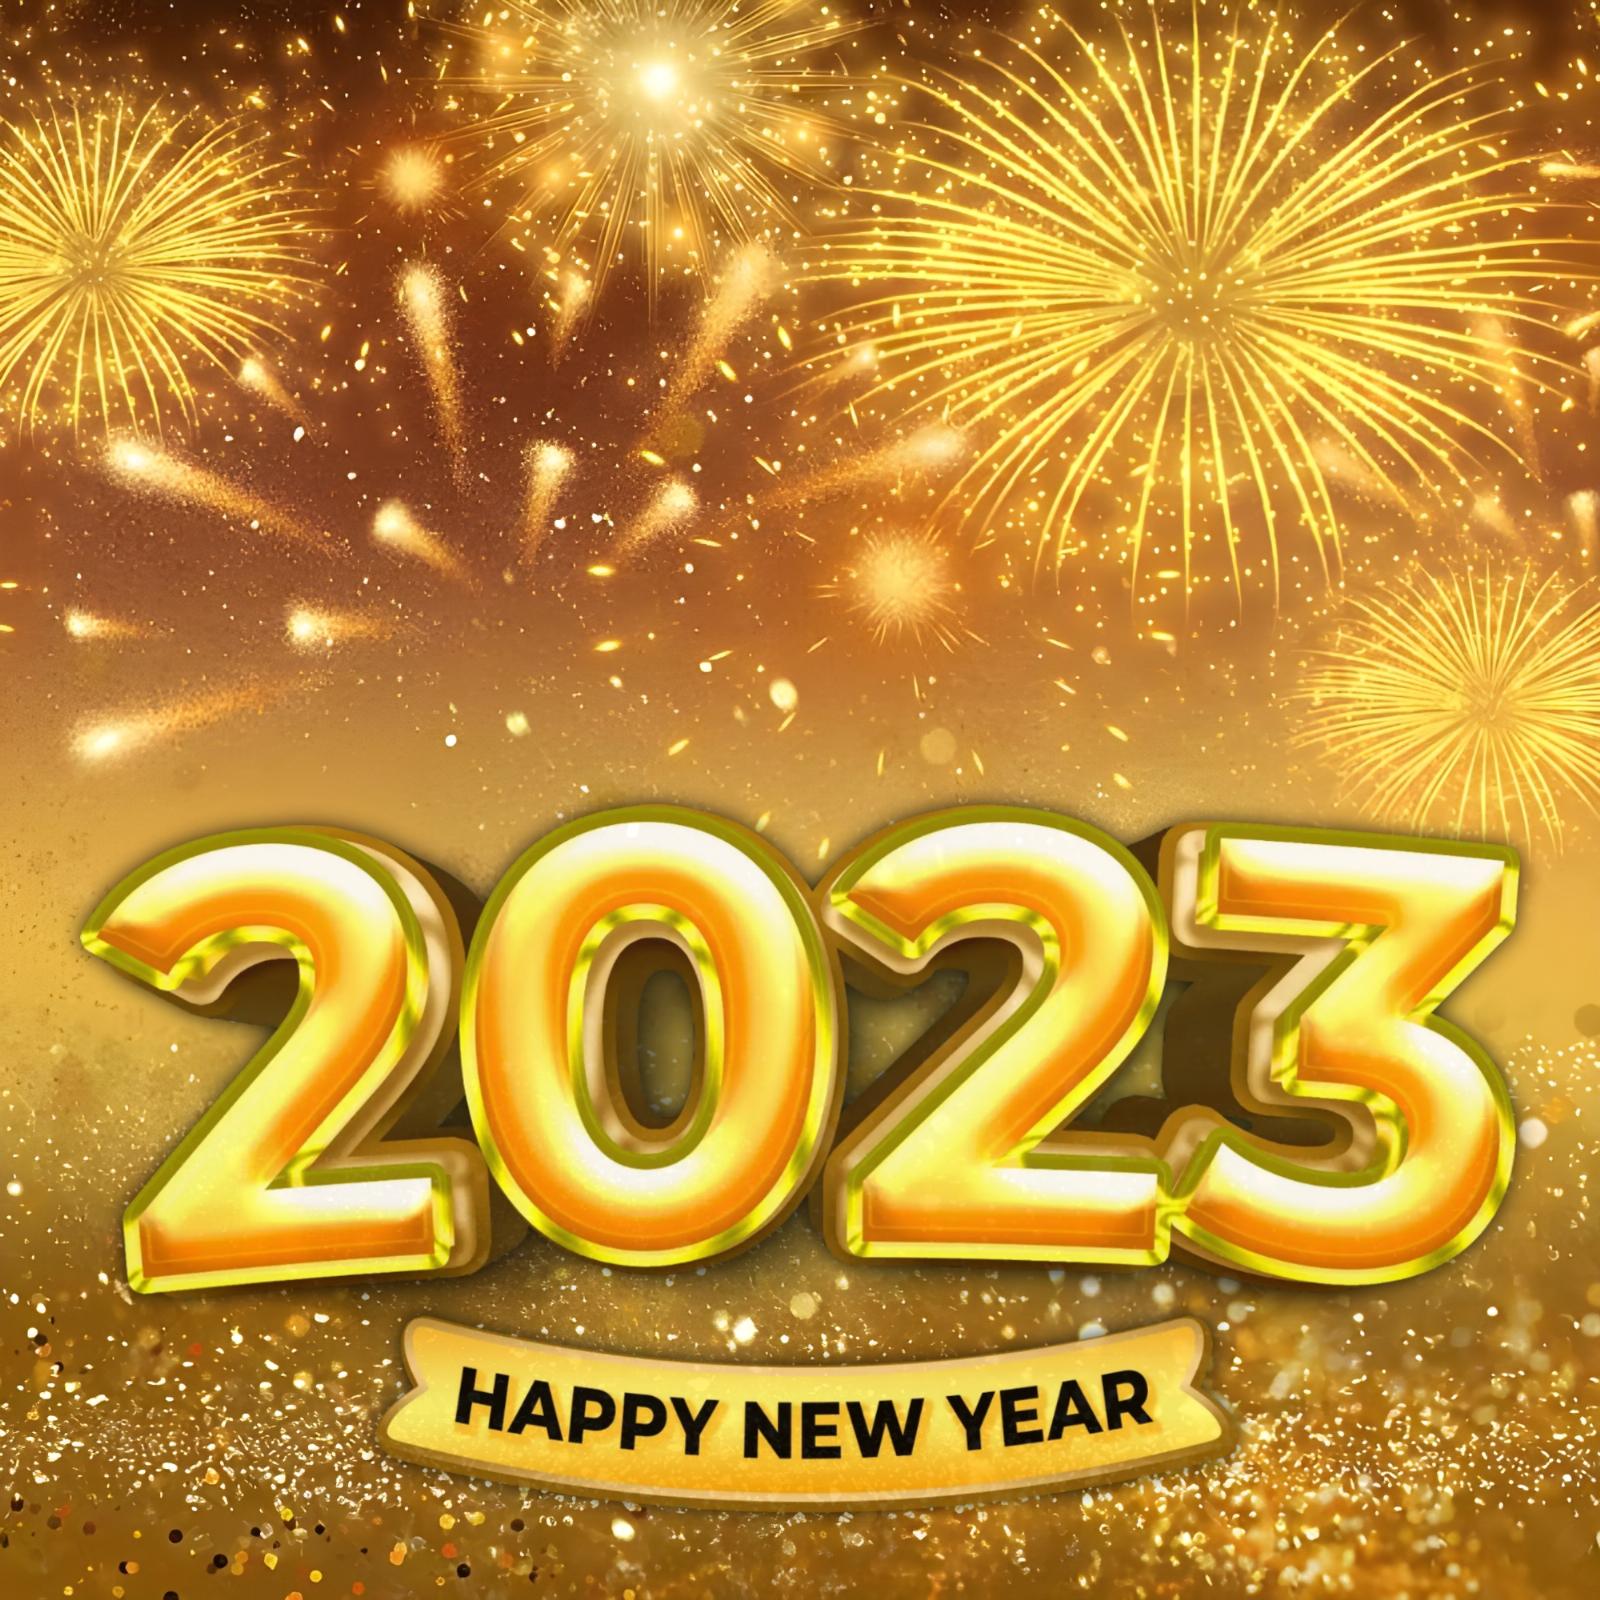 2023 Happy New Year Images Download